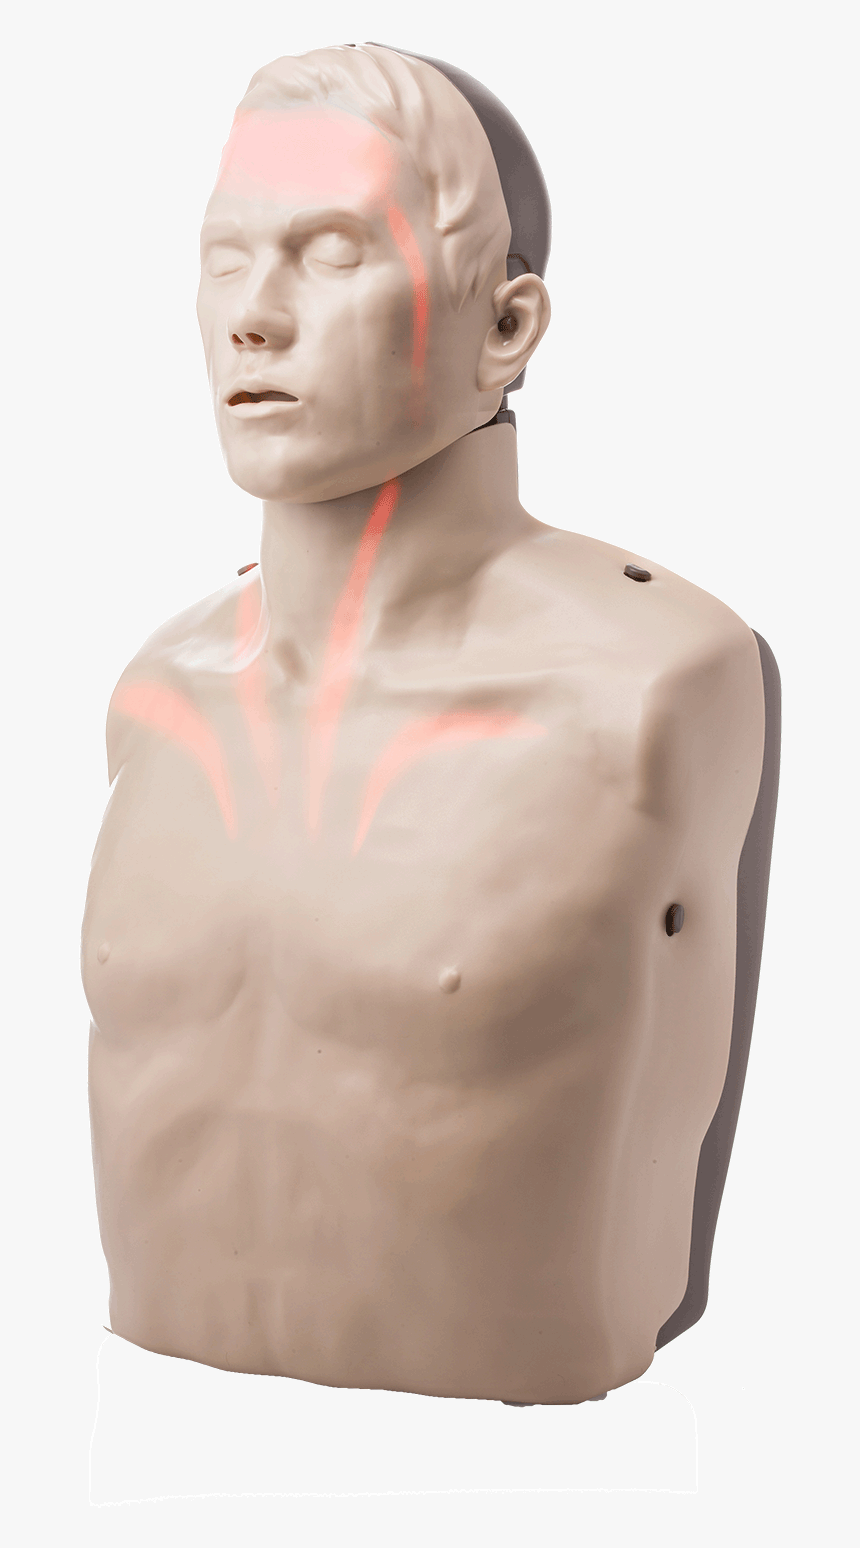 Cpr Mannequins With Light, HD Png Download, Free Download